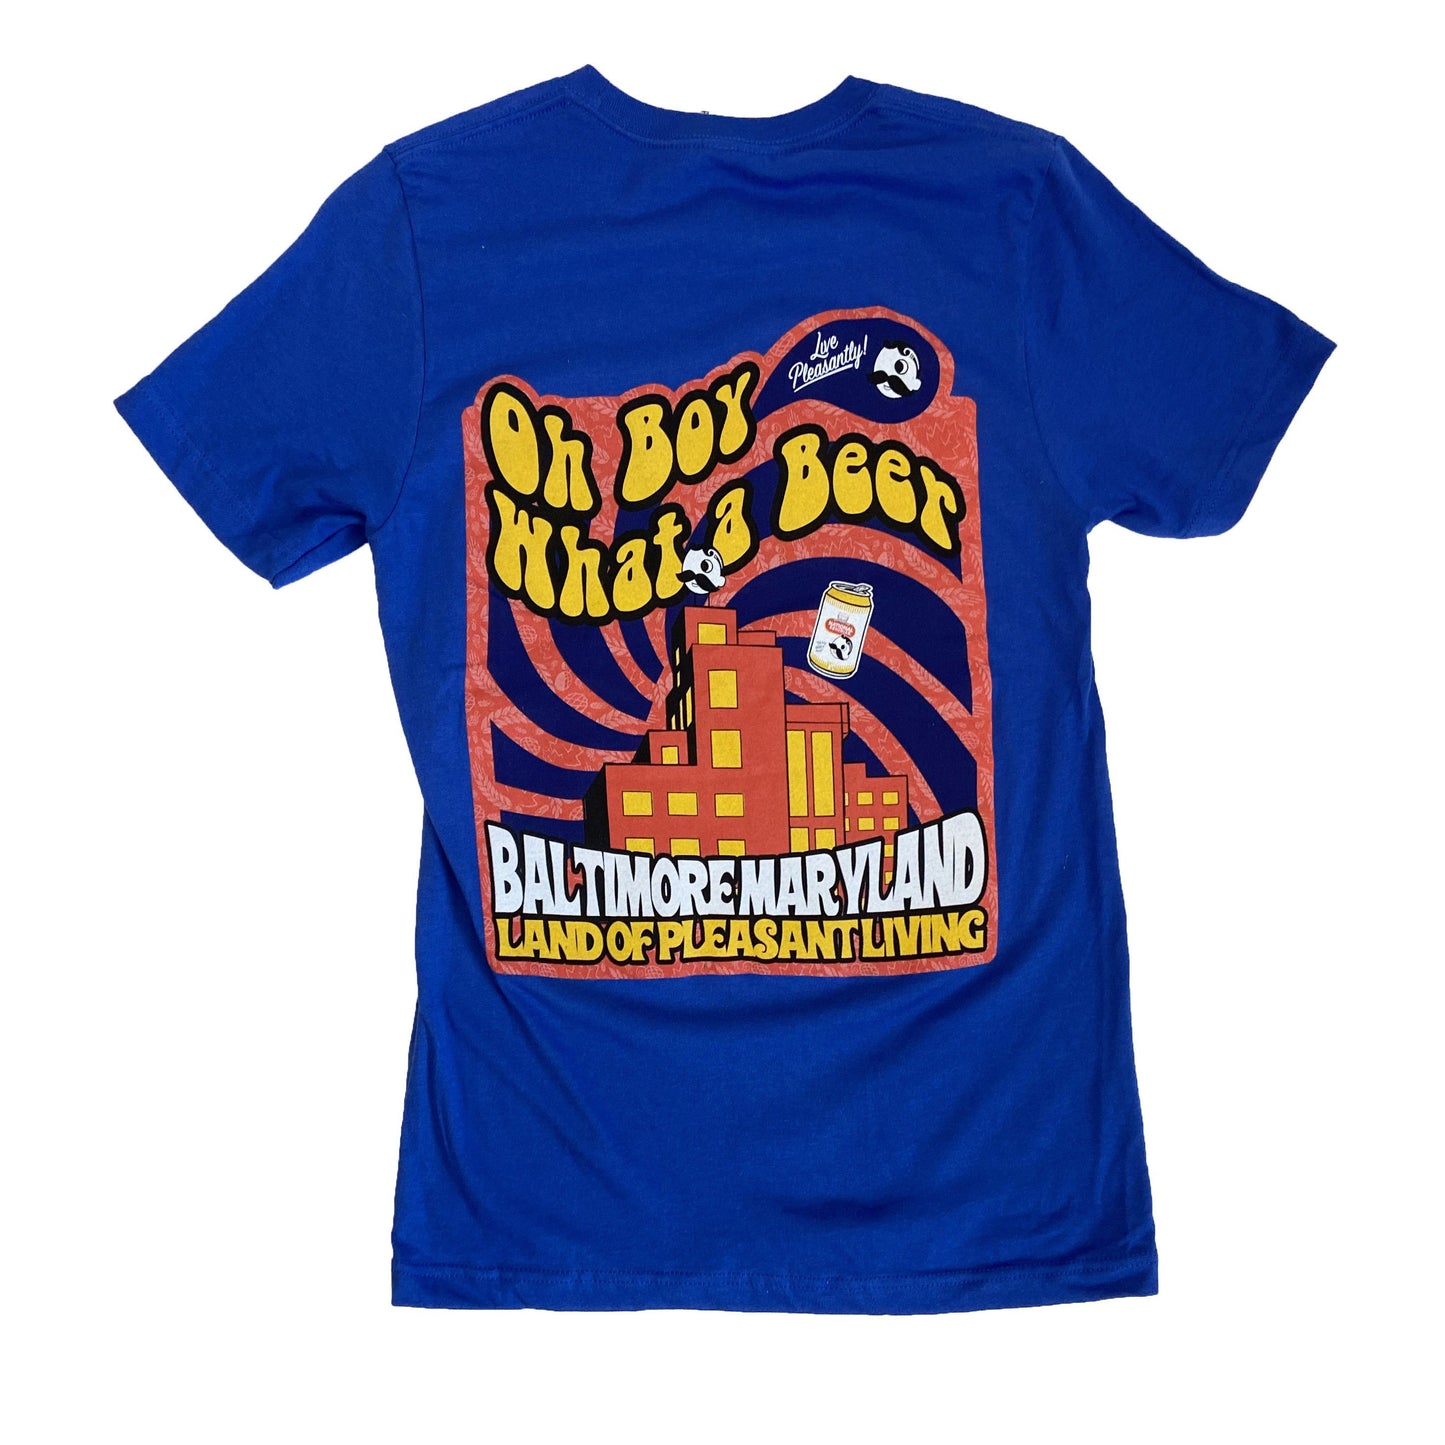 Oh Boy What a Beer - Land of Pleasant Living 70's Retro (Blue) / Shirt - Route One Apparel